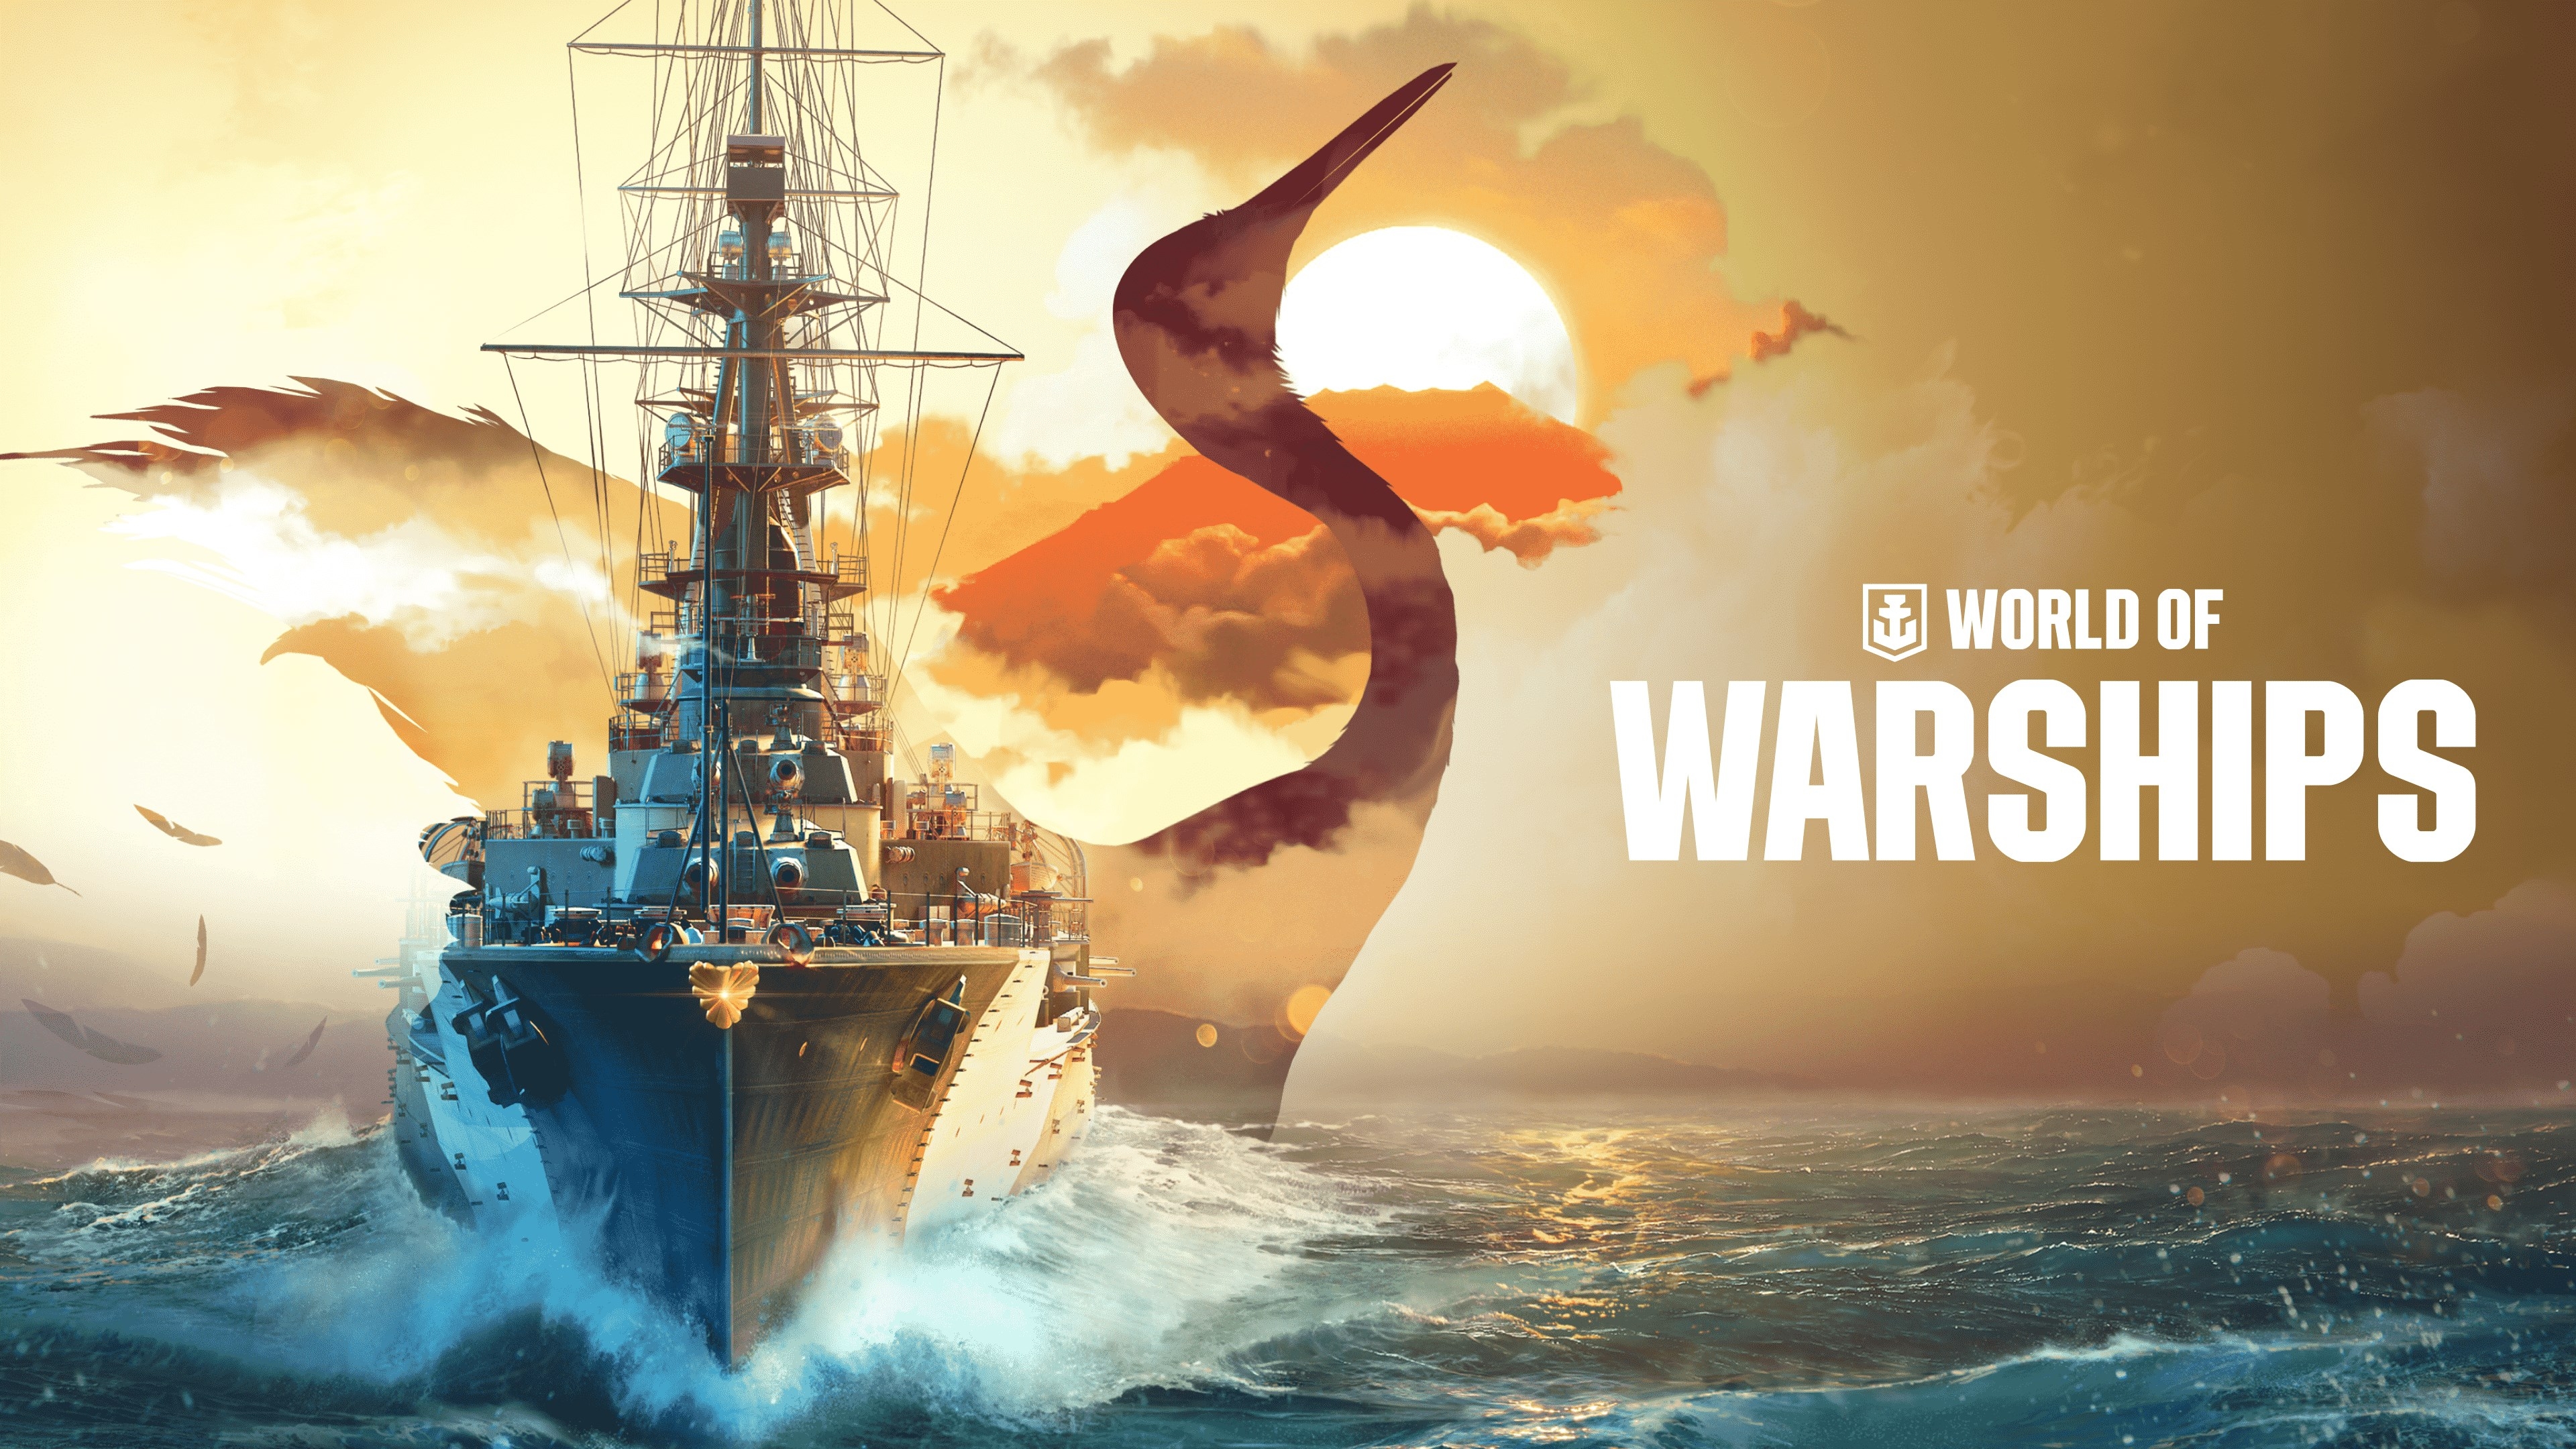 download wallpapers  Newcomers Section  World of Warships official forum